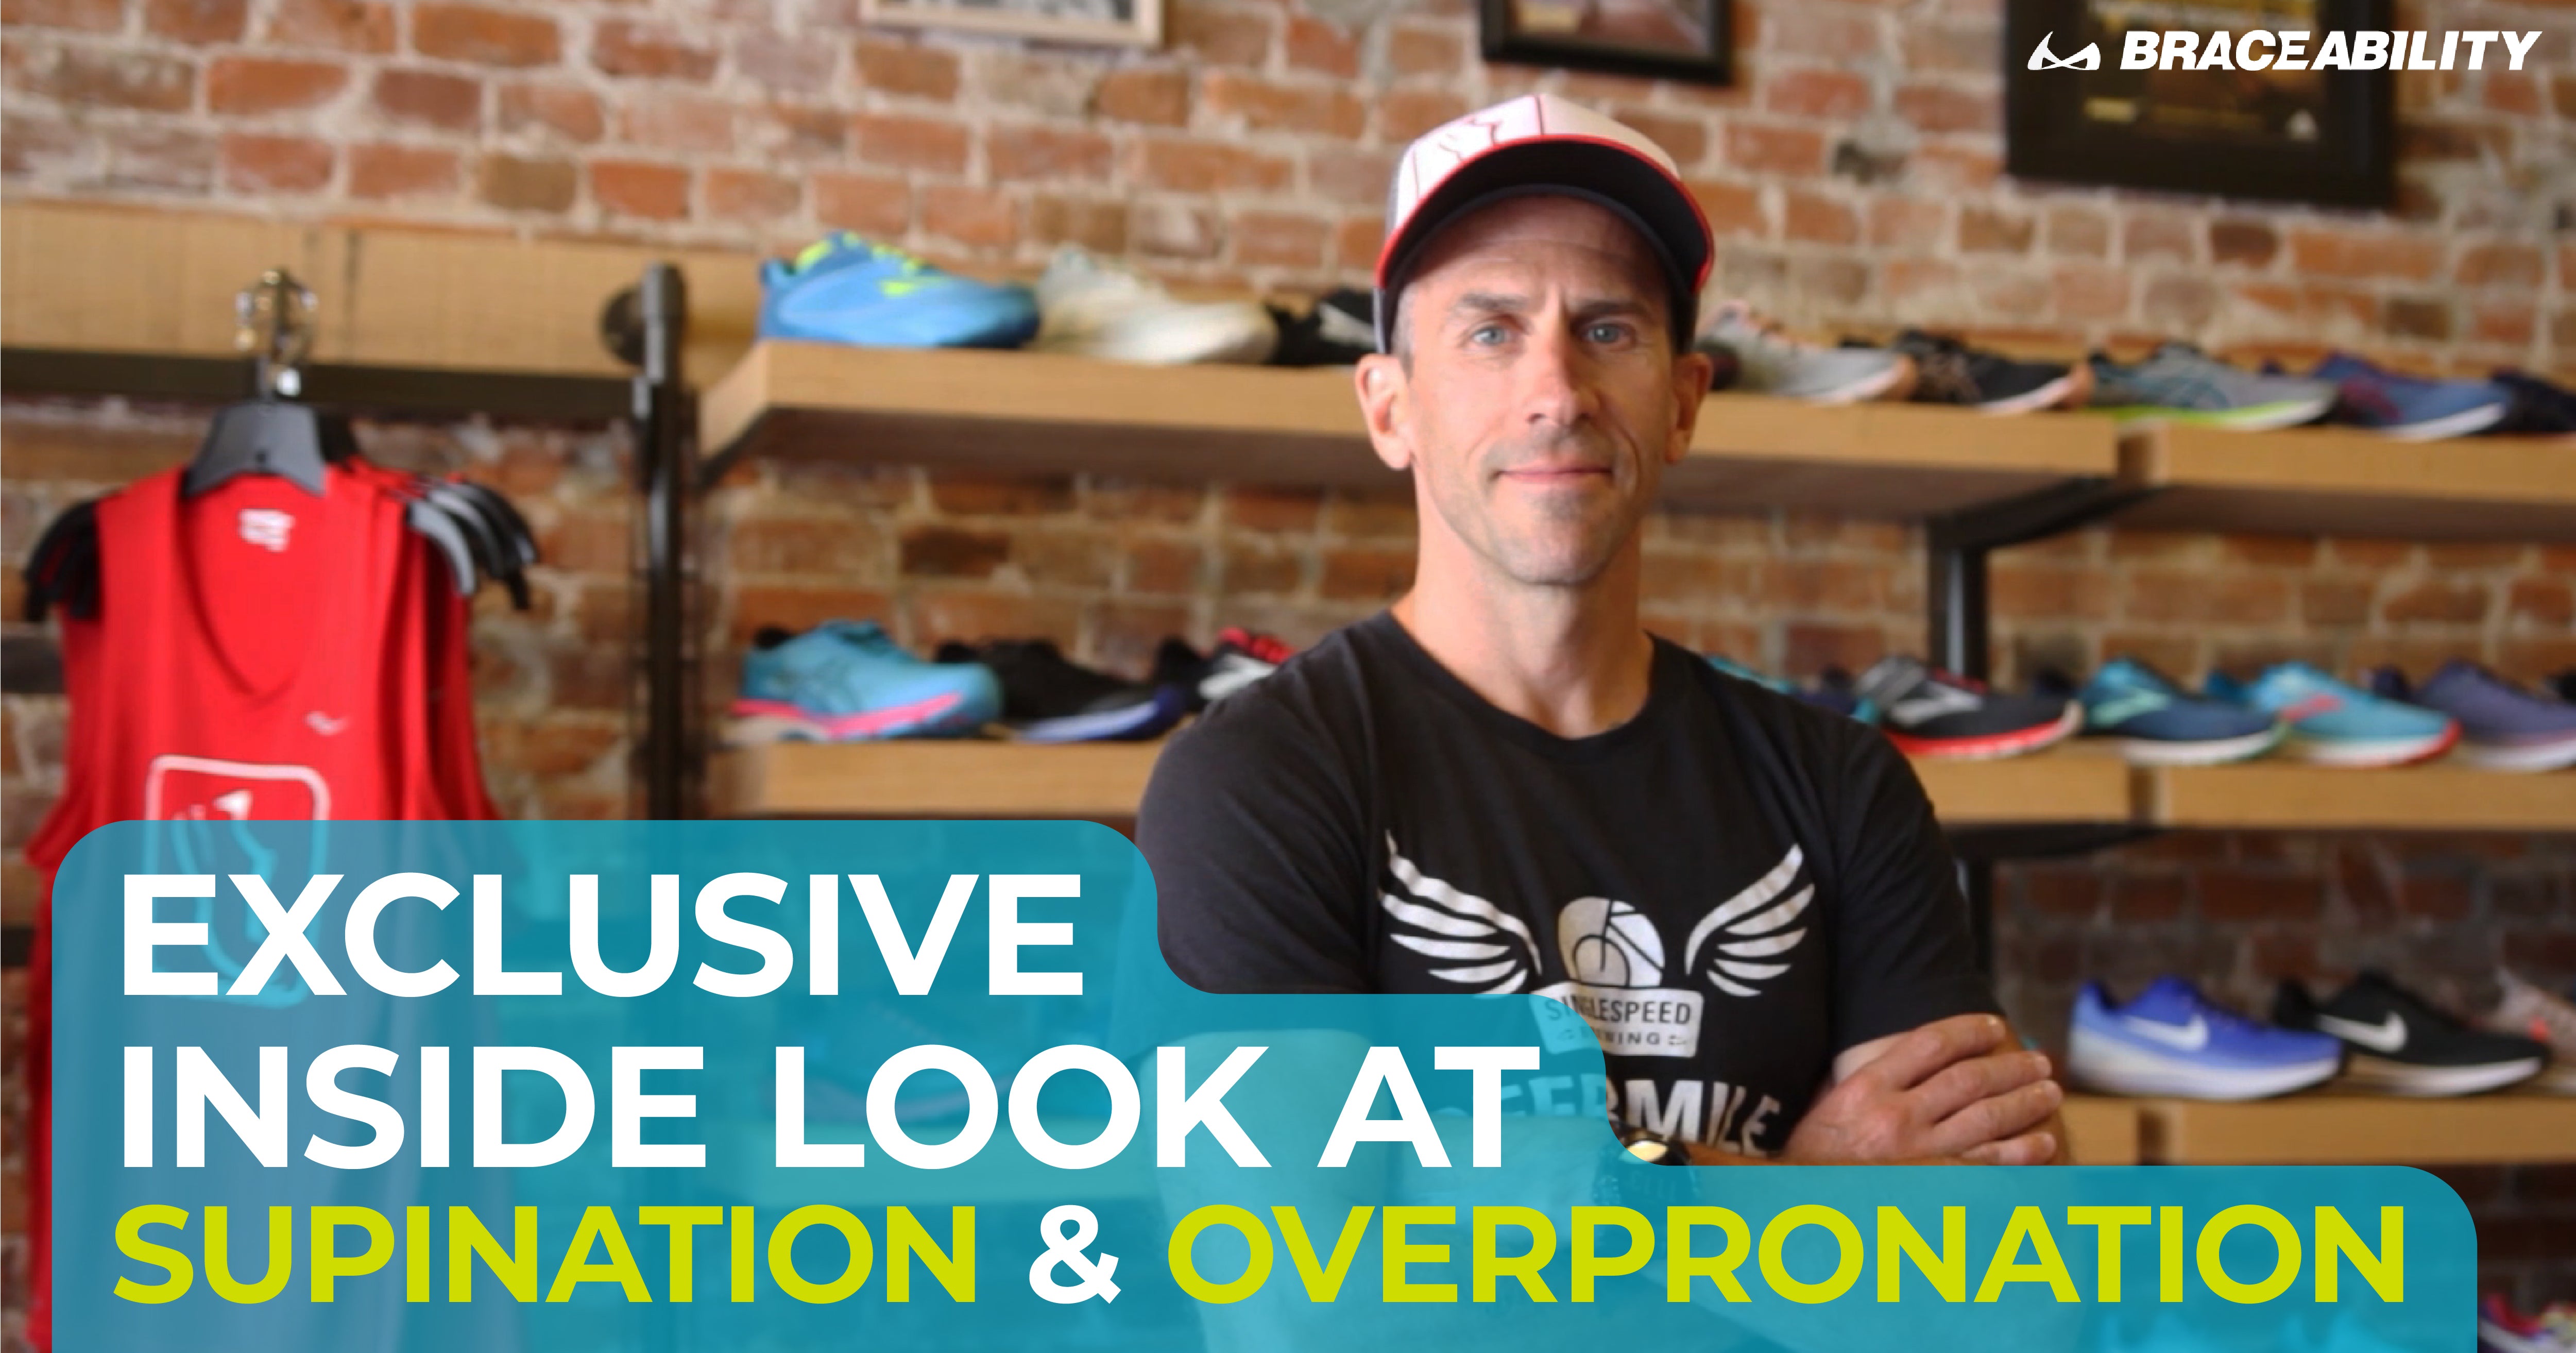 5 Tips for Correcting Supination (Underpronation)